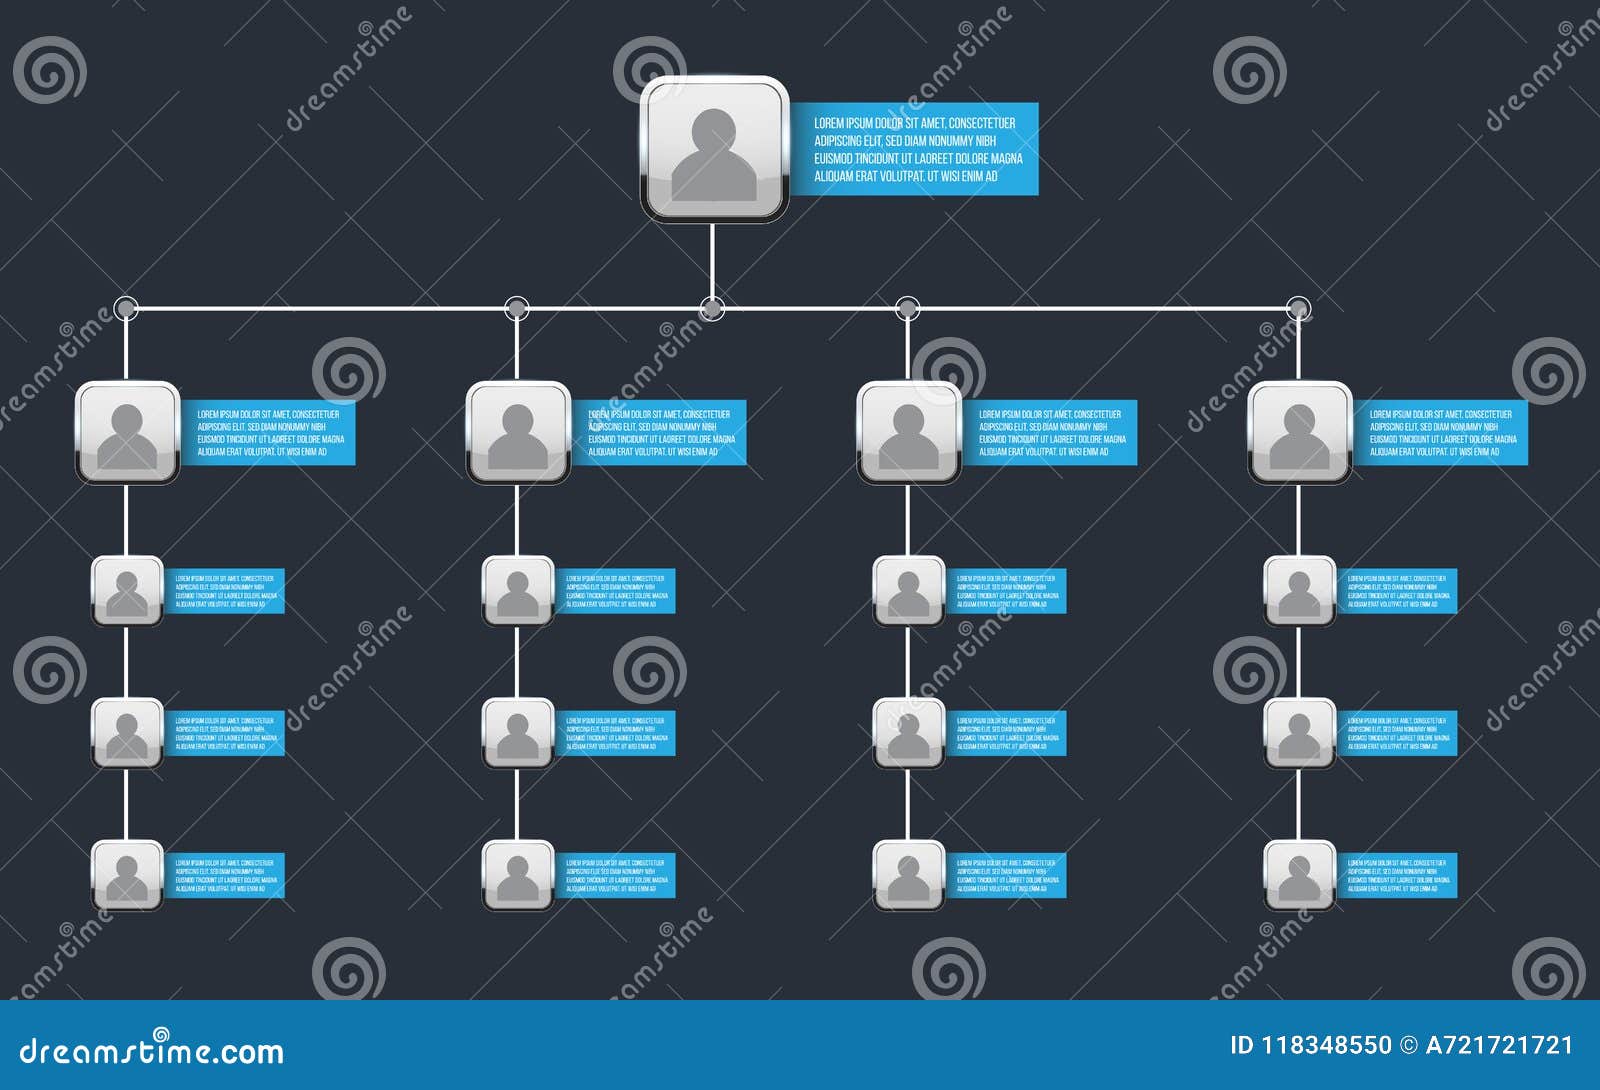 Background For Organizational Chart